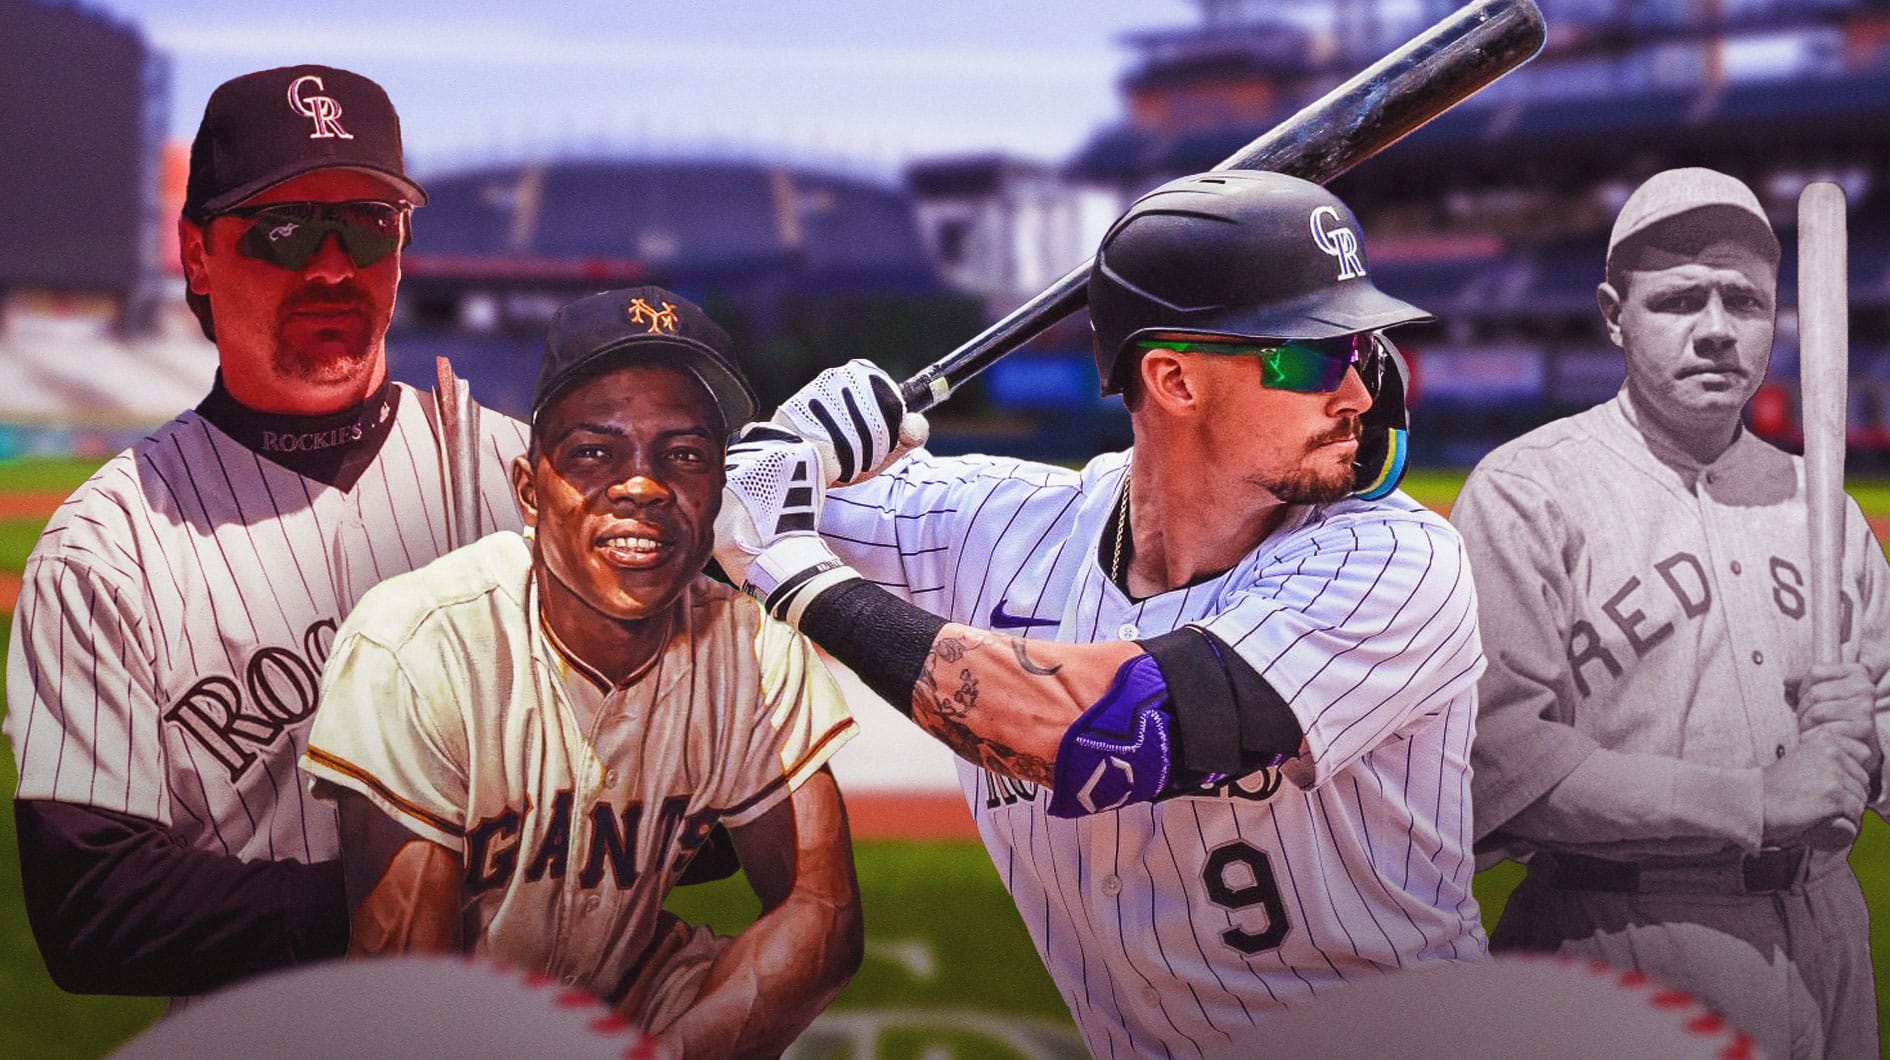 The Rockies’ rising star joins the exclusive club with Larry Walker and Babe Ruth